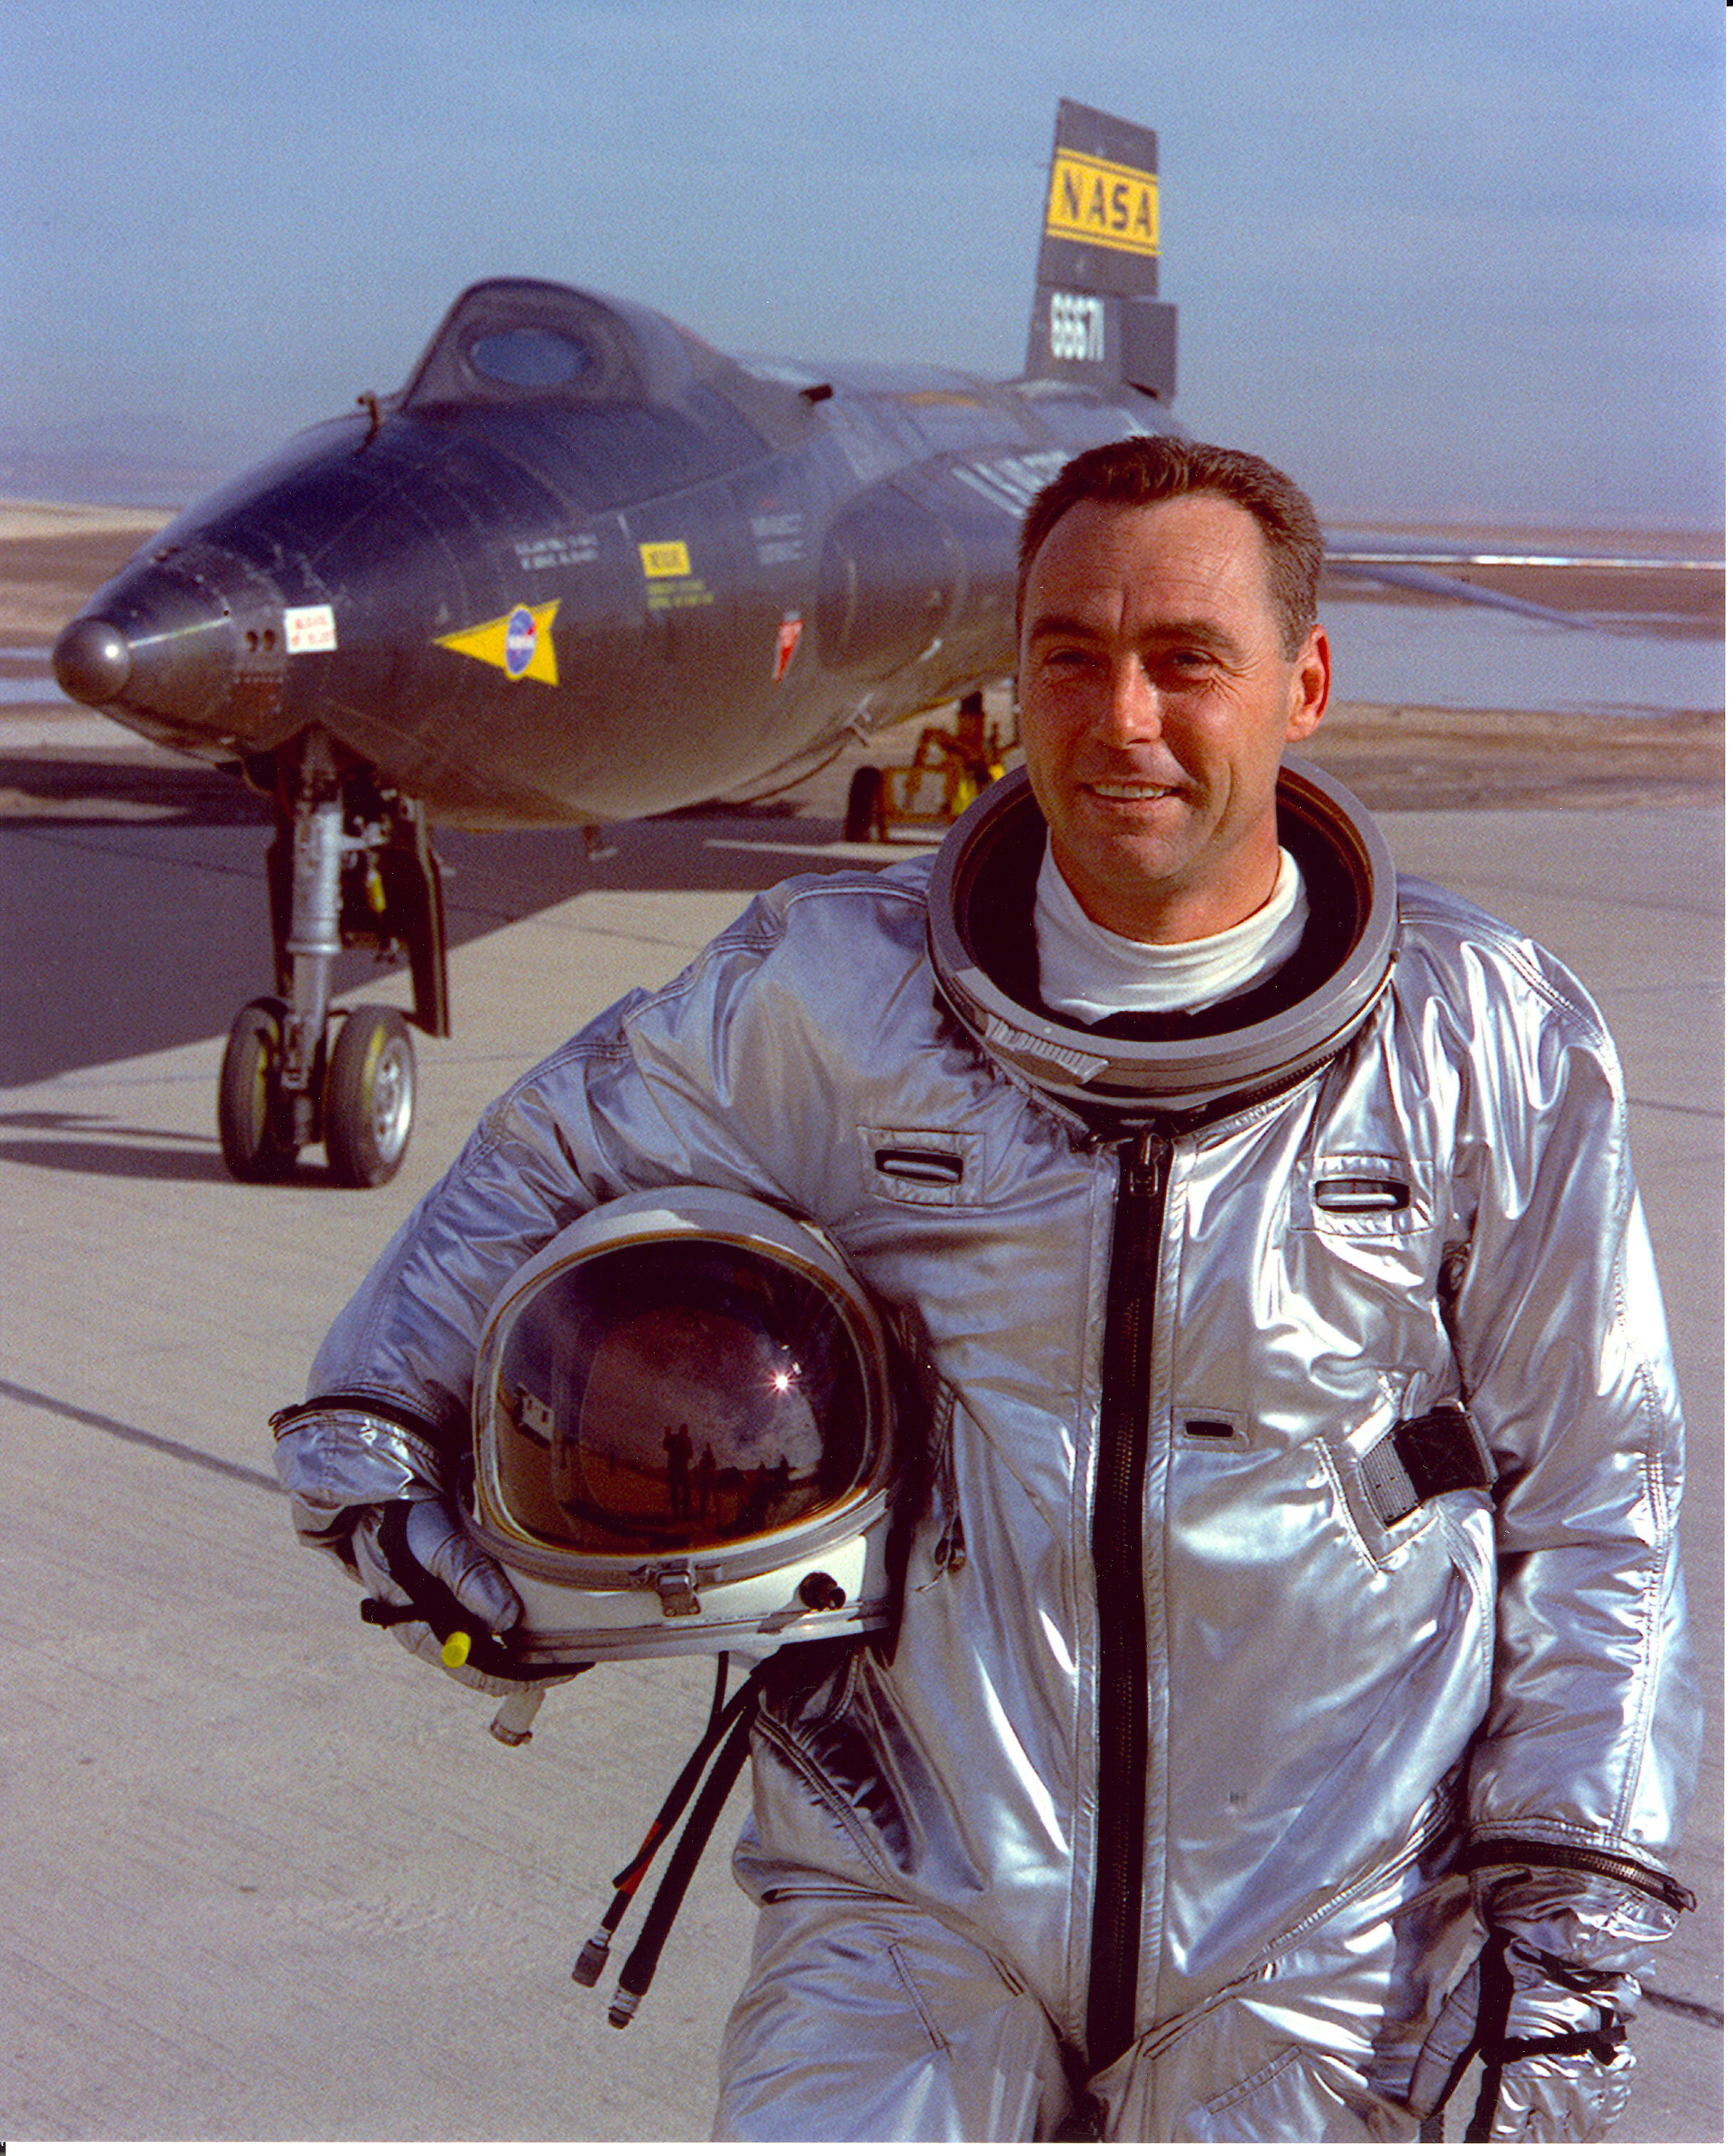 Major William J. Knight, U.S. Air Force, with the modified X-15A-2, 56-6671, at Edwards Air Force Base, California. (U.S. Air Force)